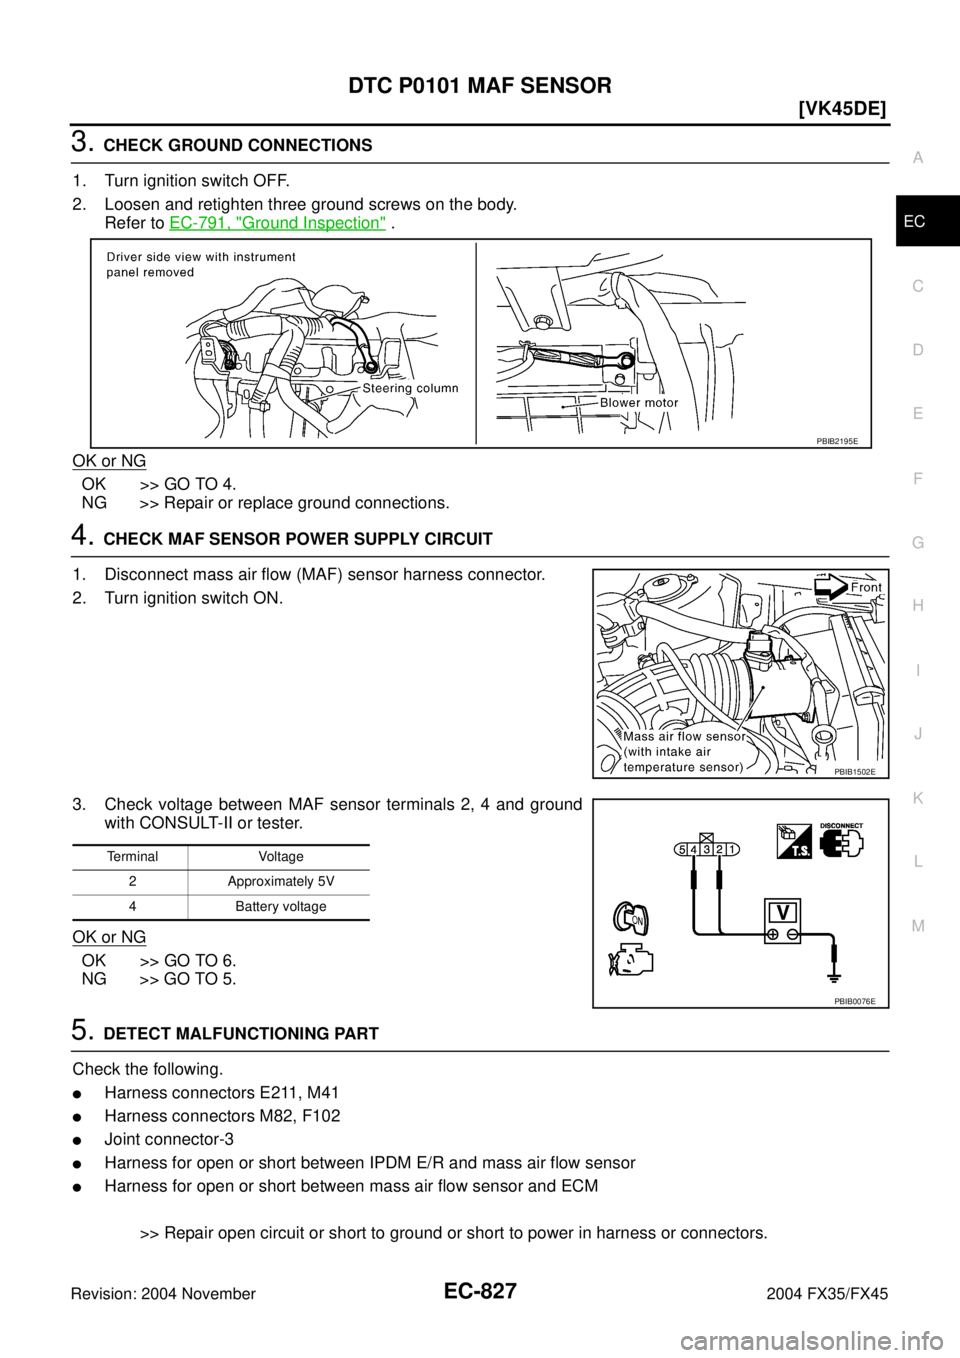 INFINITI FX35 2004  Service Manual DTC P0101 MAF SENSOR
EC-827
[VK45DE]
C
D
E
F
G
H
I
J
K
L
MA
EC
Revision: 2004 November 2004 FX35/FX45
3. CHECK GROUND CONNECTIONS
1. Turn ignition switch OFF.
2. Loosen and retighten three ground scre